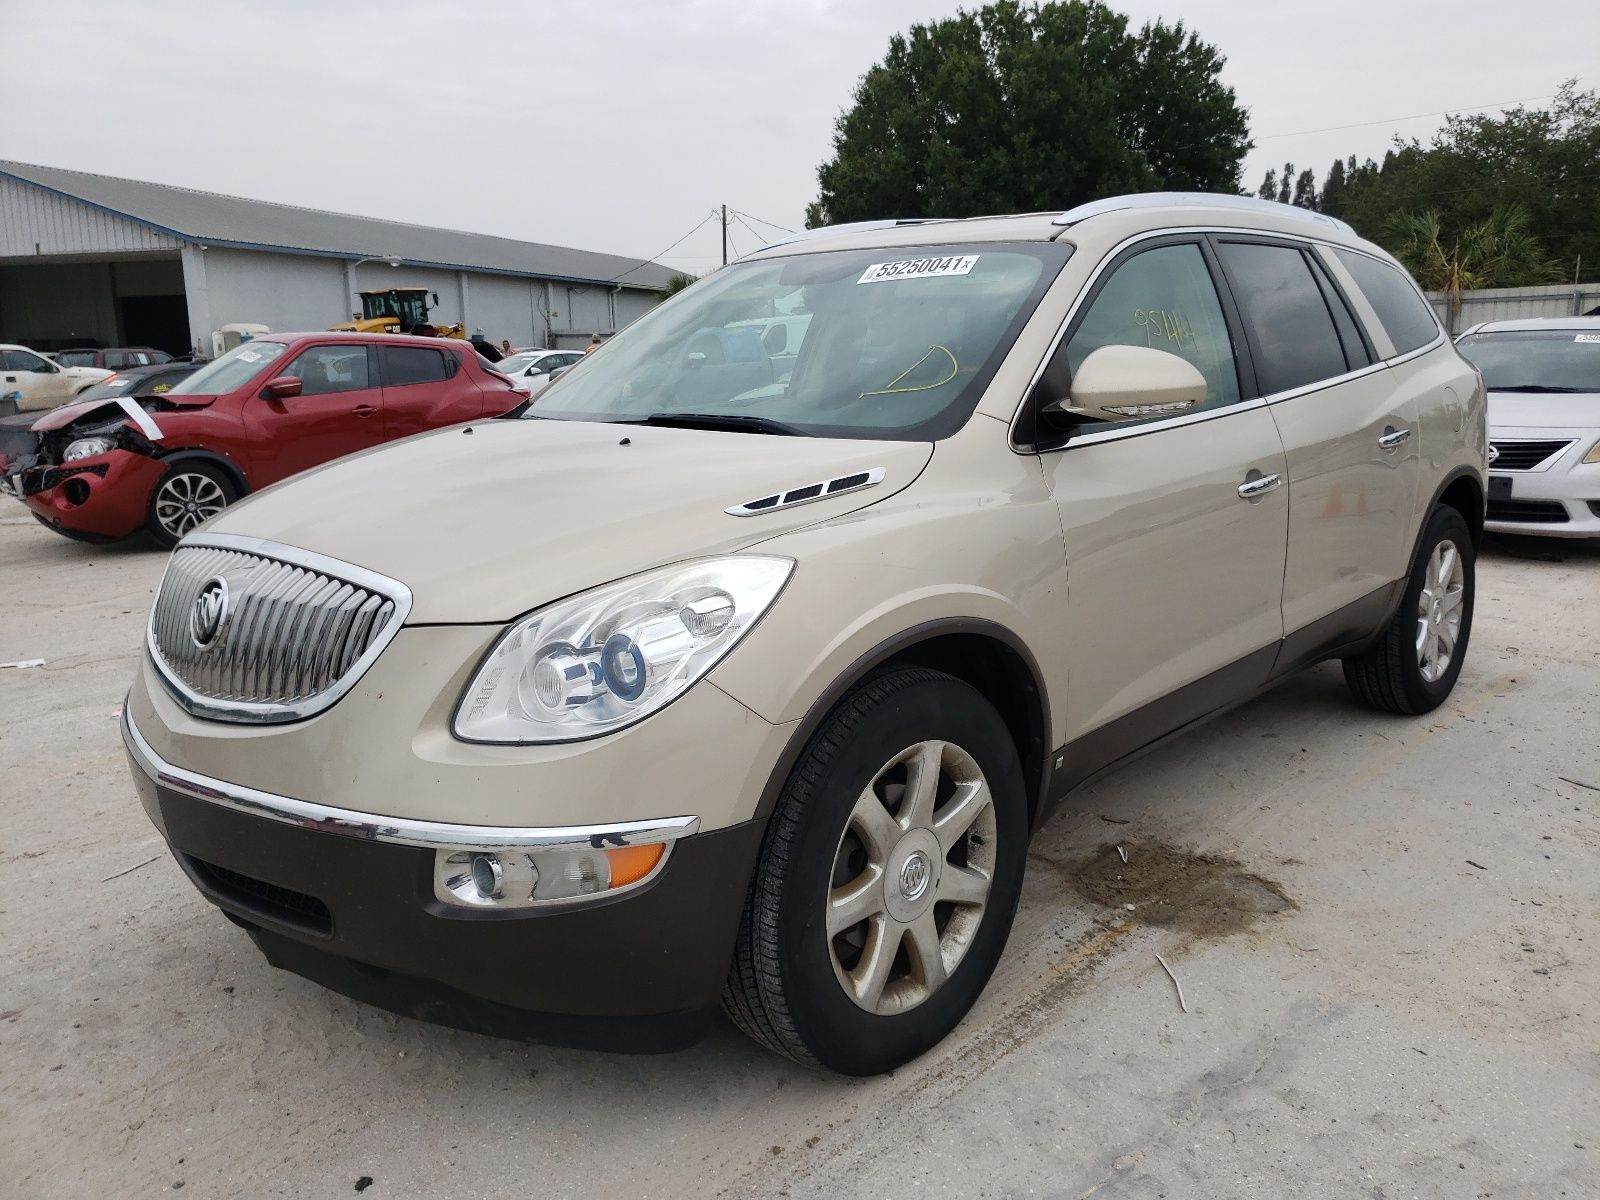 2 of 5GALRBED4AJ188643 Buick Enclave 2010